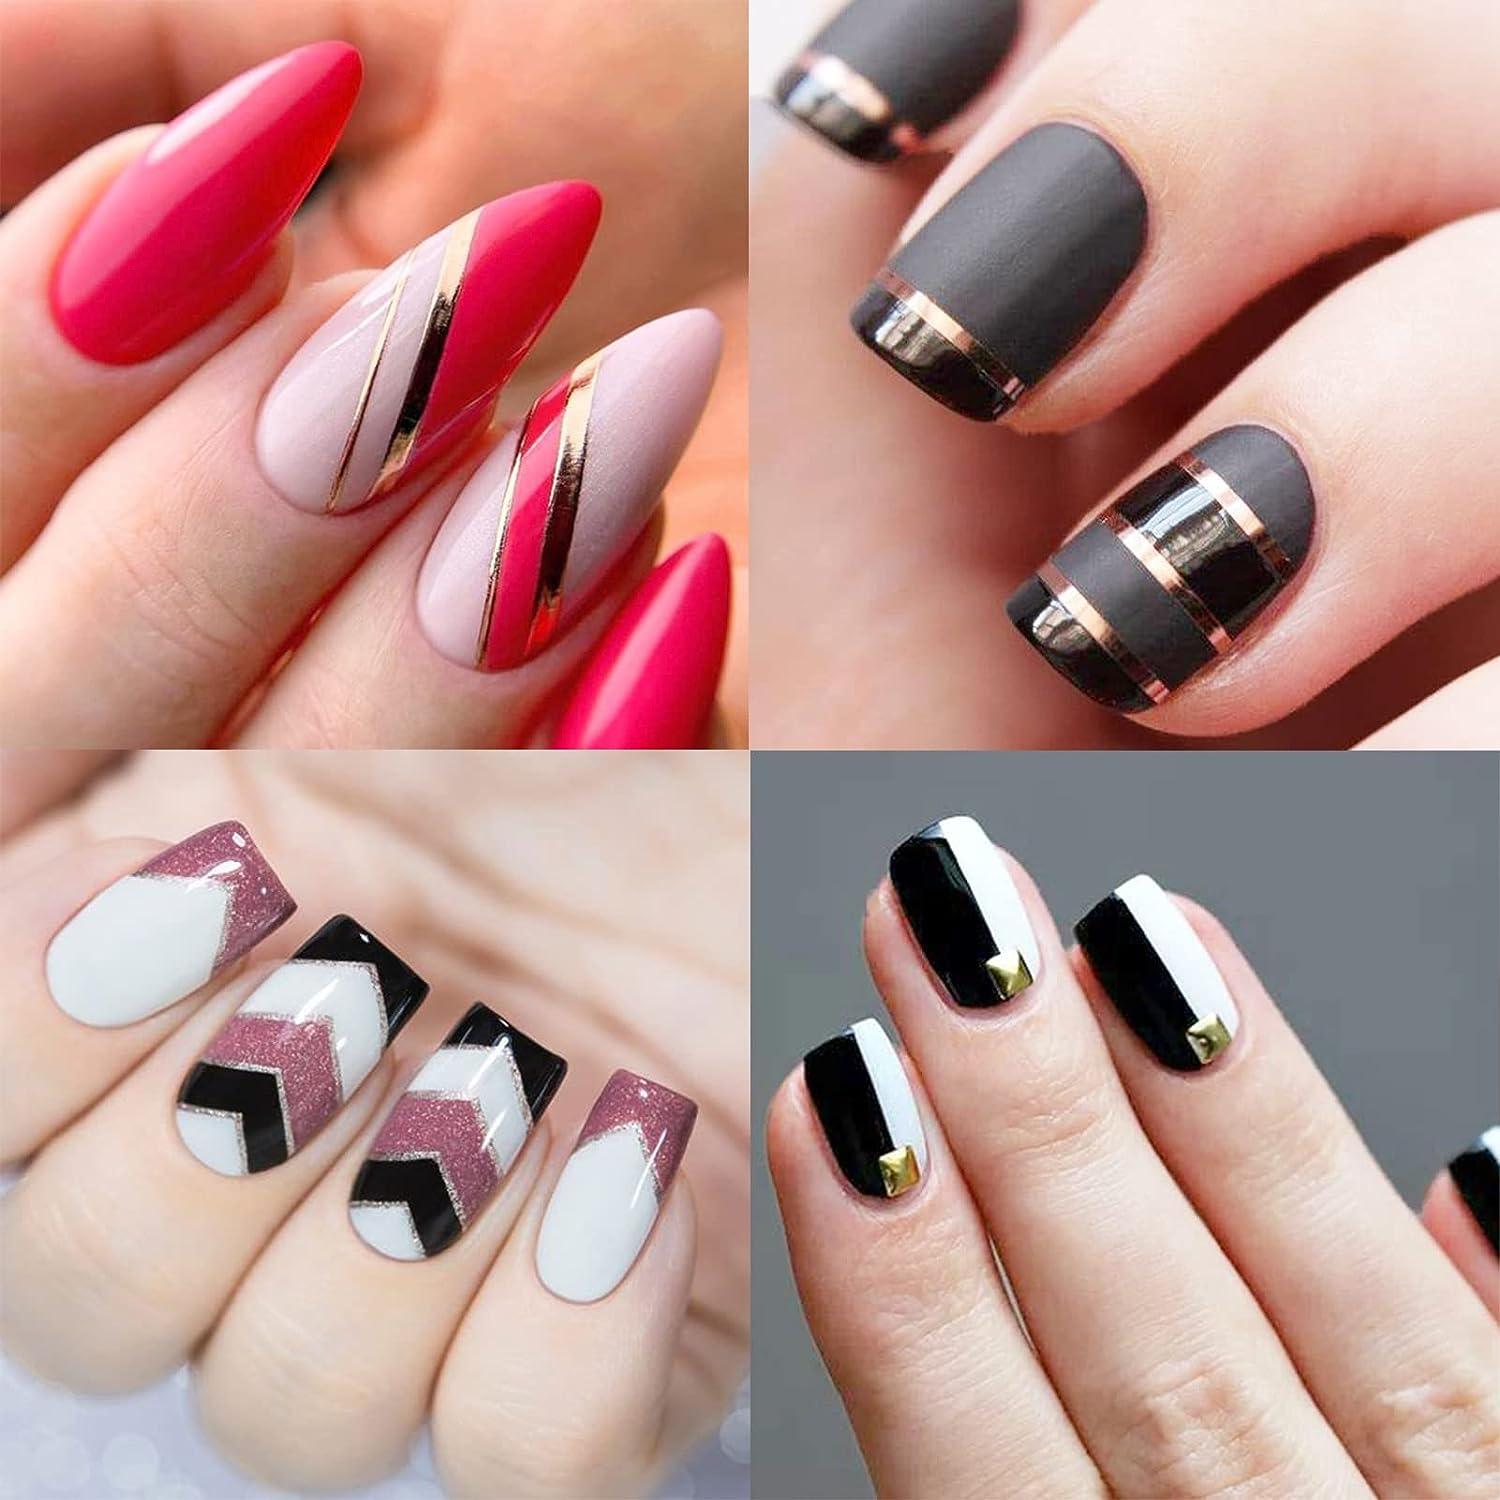 1422 Pcs French Tip Nail Guides, Self-Adhesive French Moon Shaped V-Shaped  Manicure Strip Stickers for Edge Auxiliary Black DIY Decoration Stencil